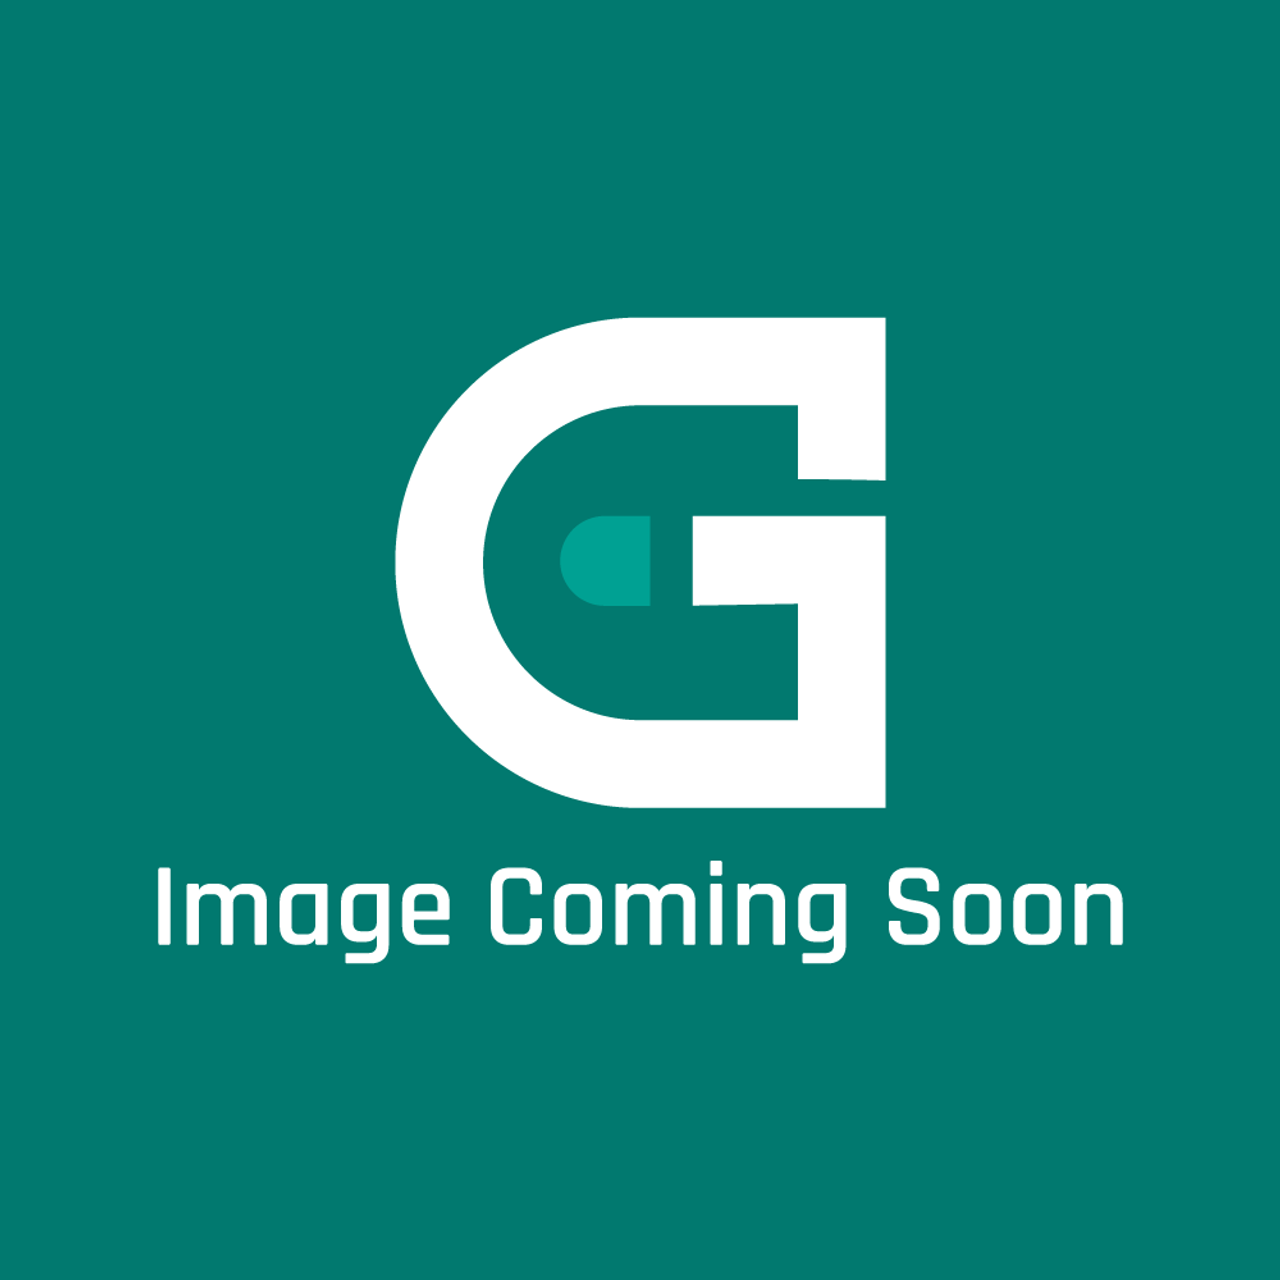 Garland 4528330 - Box-Spark Ignitor 8Plts - Image Coming Soon!